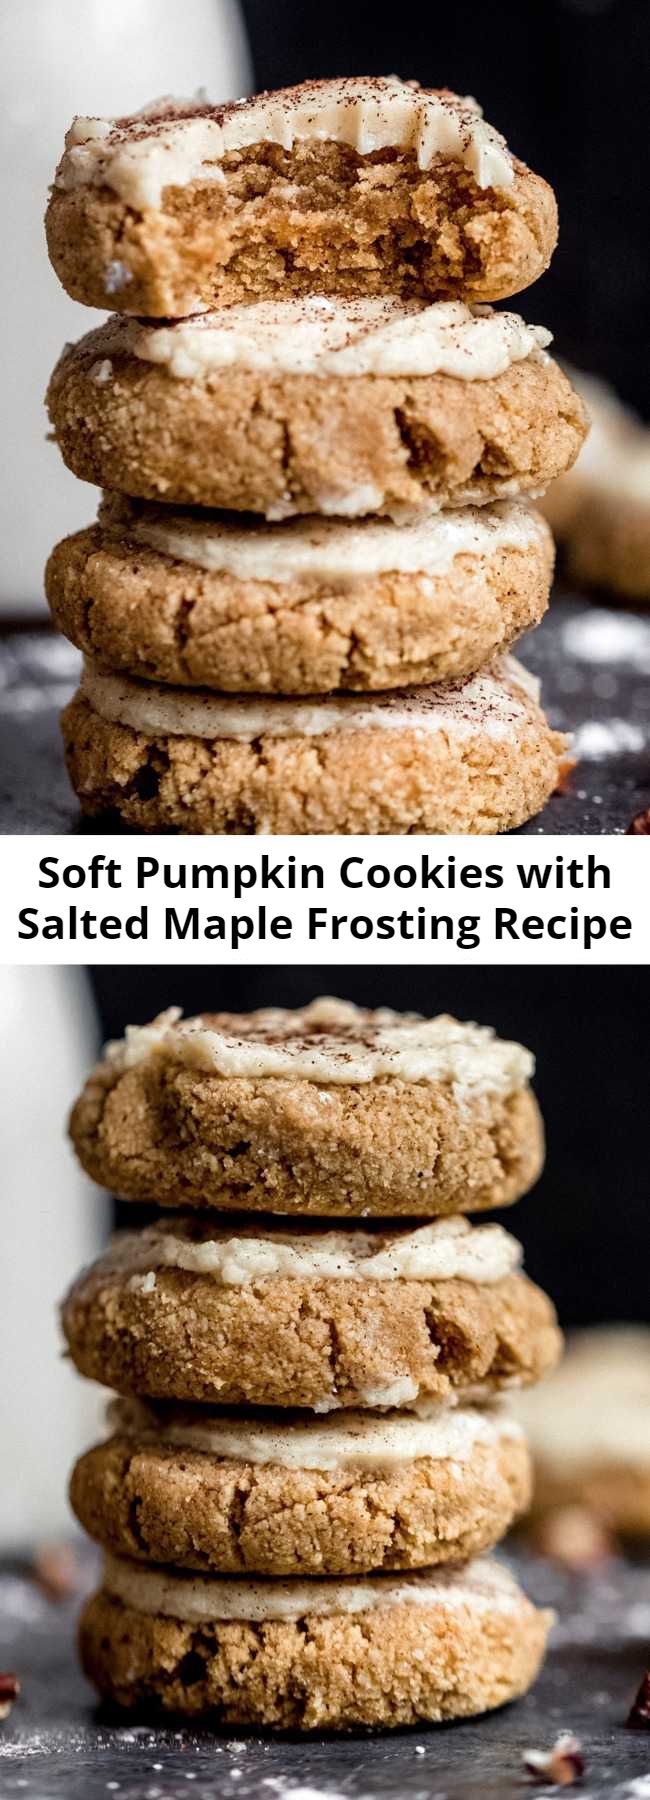 Soft Pumpkin Cookies with Salted Maple Frosting Recipe - These healthy soft pumpkin cookies with an addicting salted maple frosting are absolutely delicious! These melt-in-your-mouth cookies are both gluten free and grain free and taste like a slice of your favorite pumpkin pie! #cookies #pumpkin #pumpkinrecipe #healthydessert #glutenfree #baking #grainfree